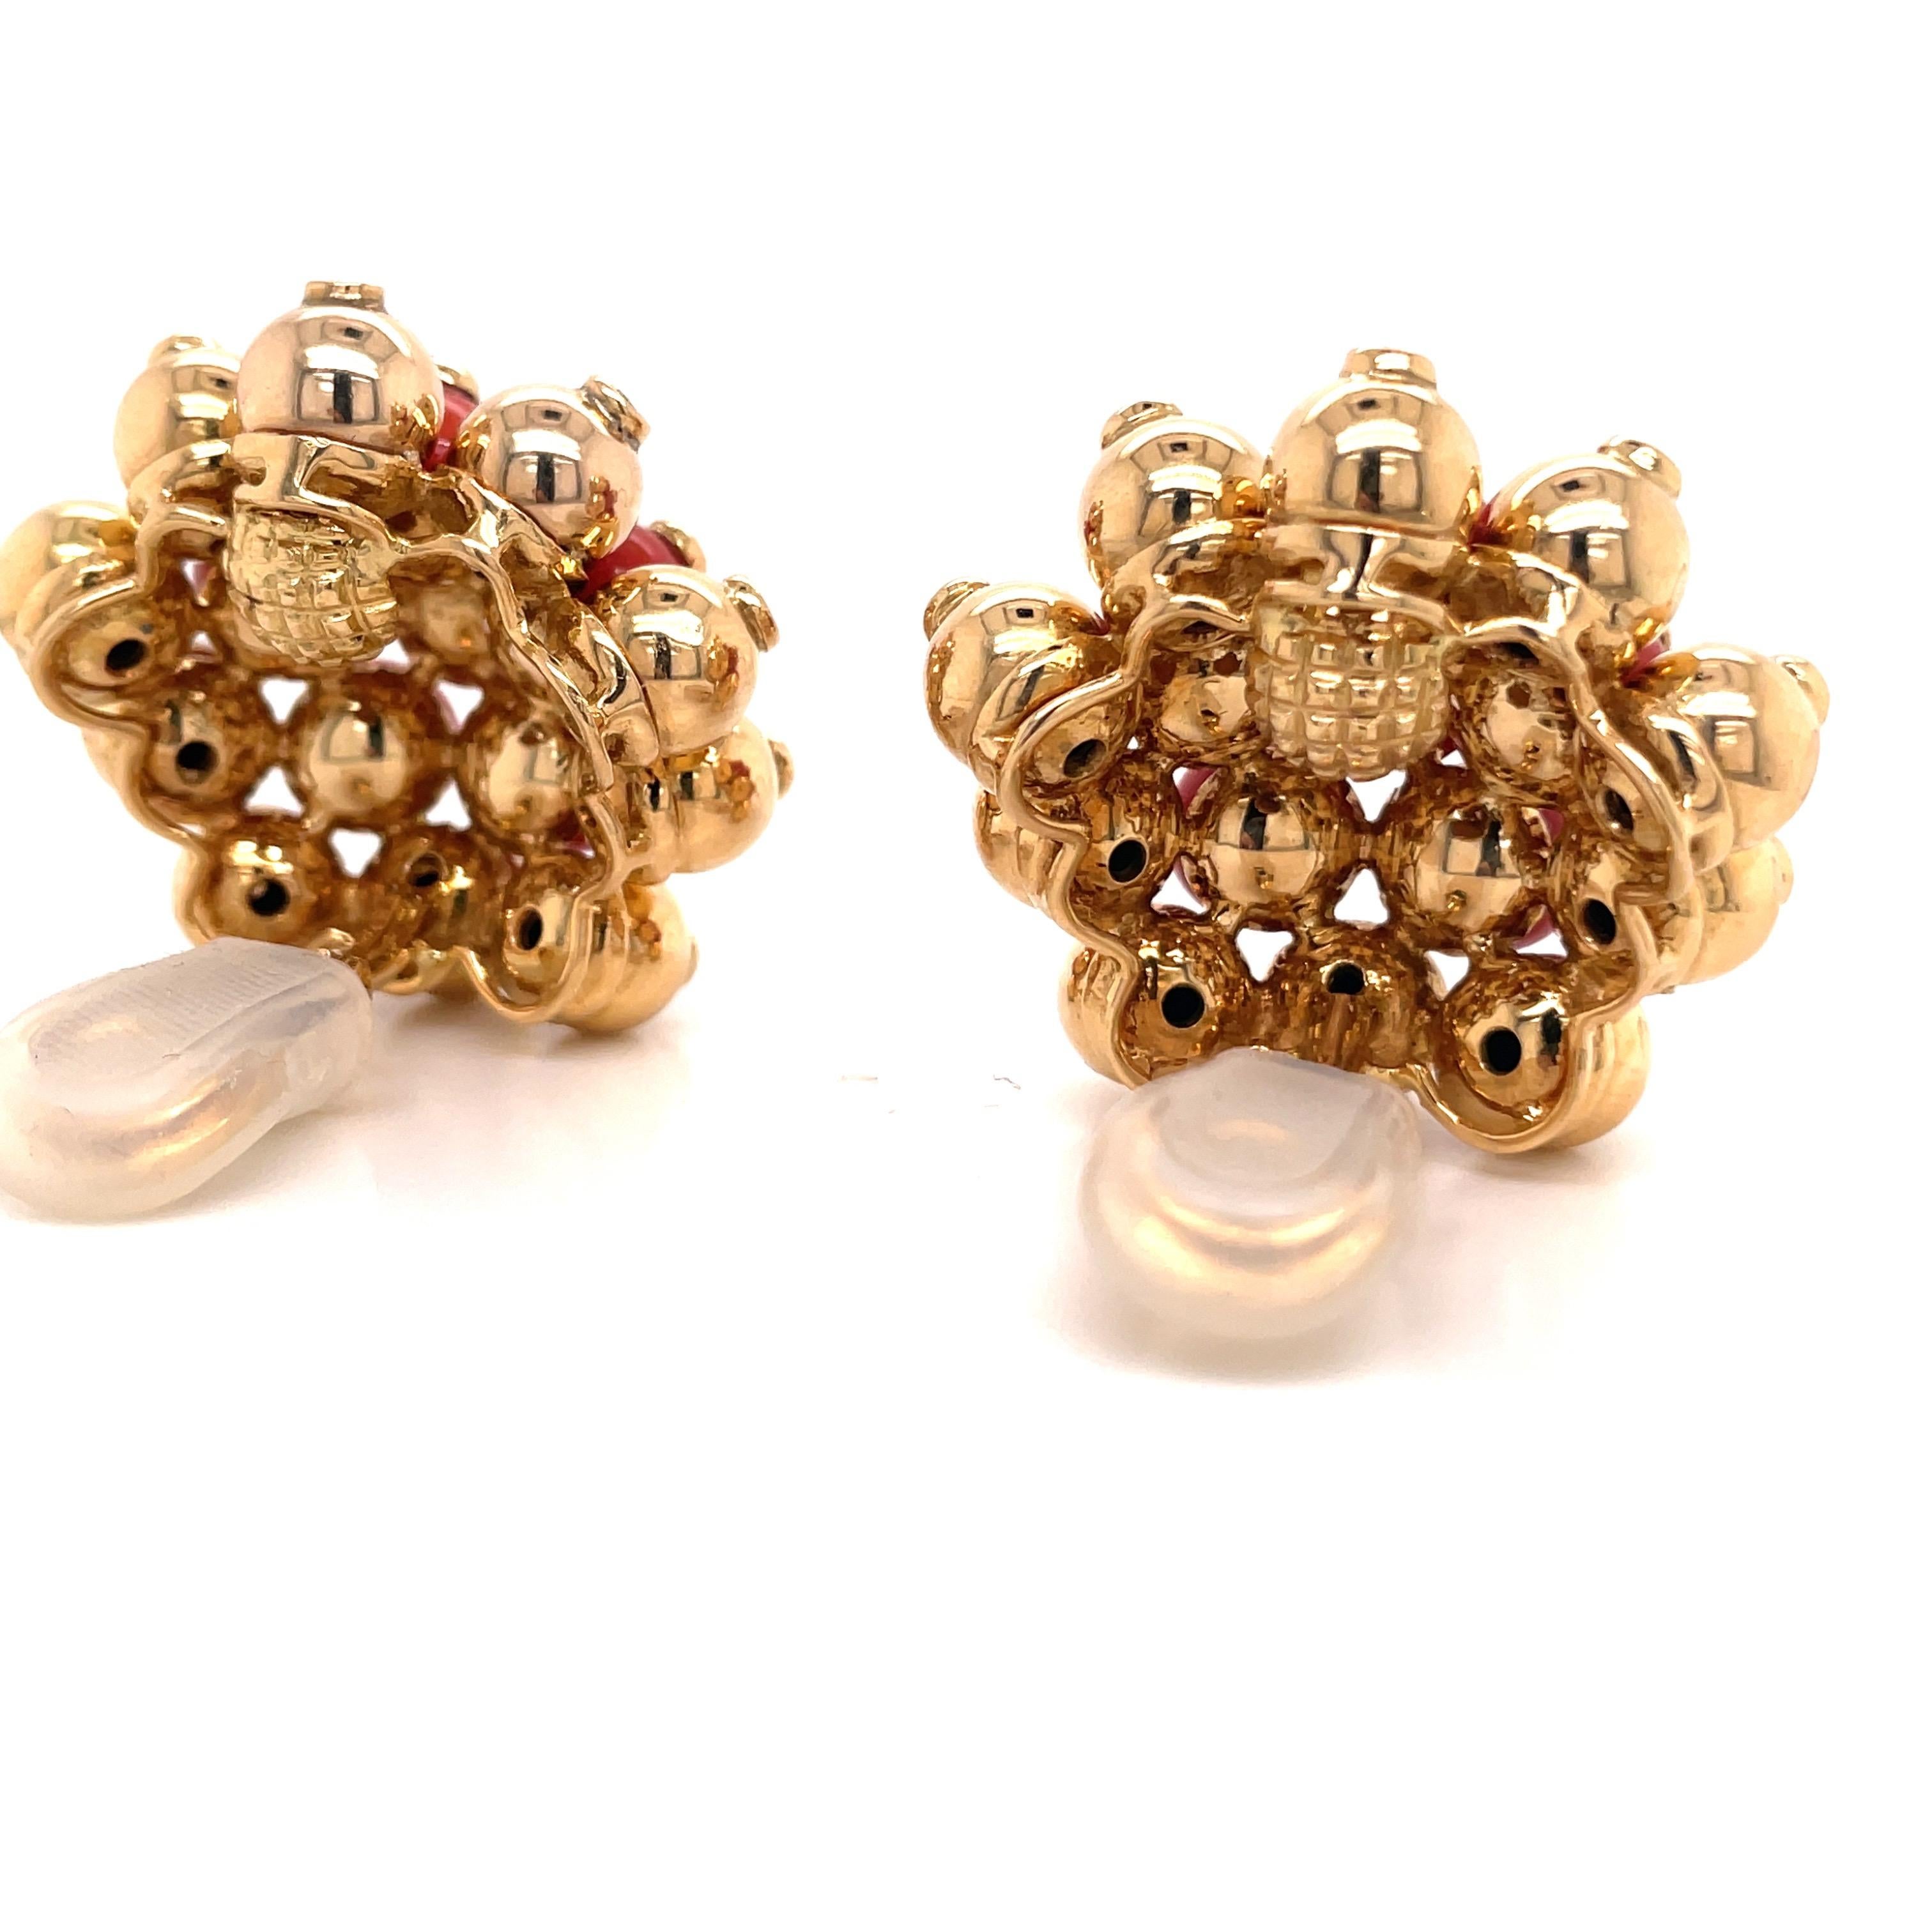 Oversized Coral Diamond Gold Bead Earrings 18 Karat Yellow Gold 53.1 Grams For Sale 2